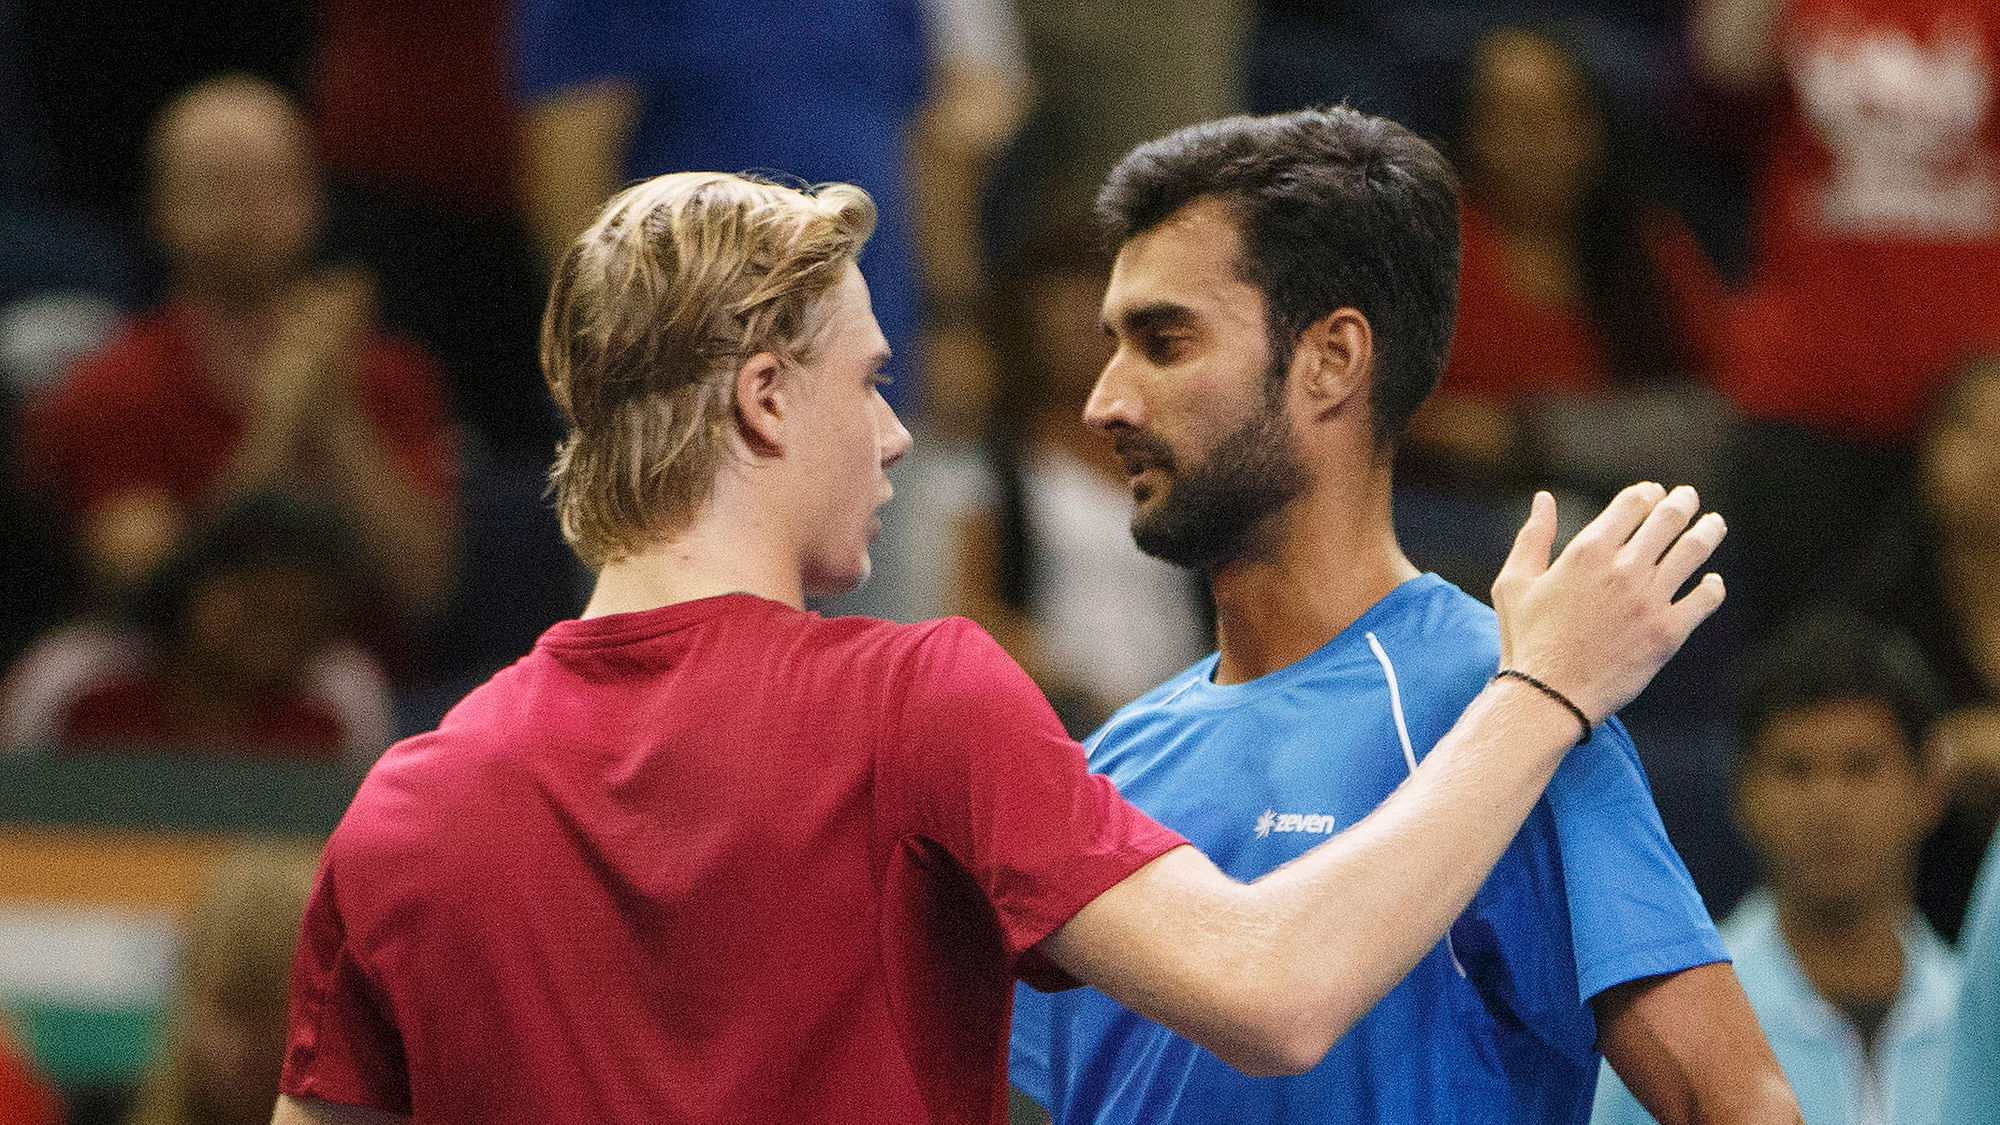 Canada’s Denis Shapovalov, left, and India’s Yuki Bhambri congratulate meet at the net after Shapovalov’s win during a Davis Cup match